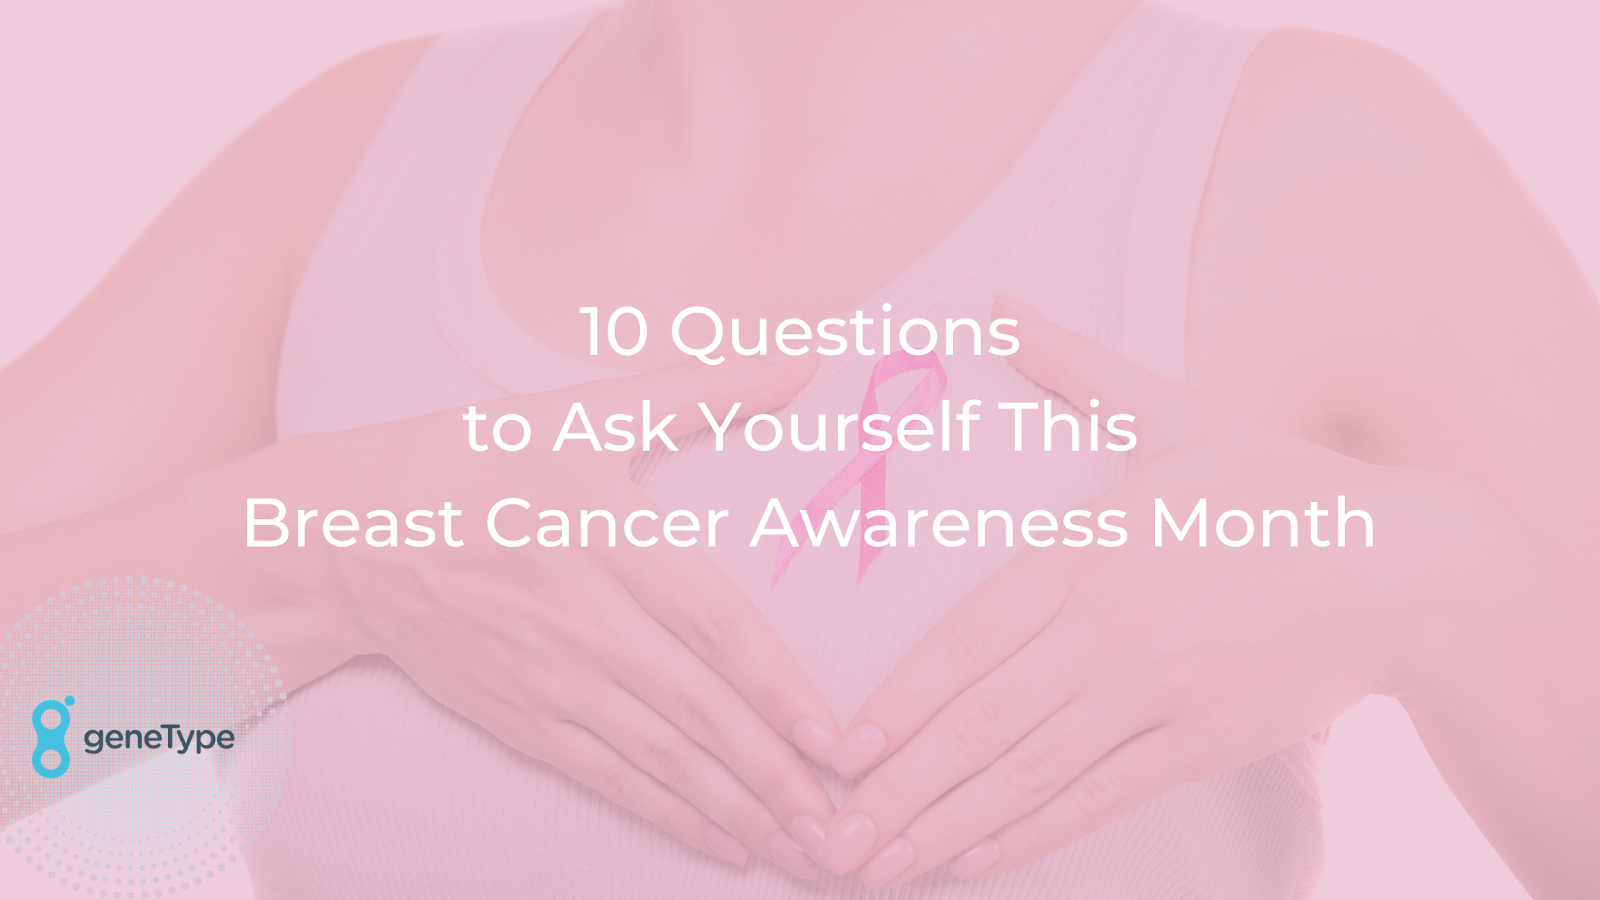 10 Questions to Ask Yourself This Breast Cancer Awareness Month